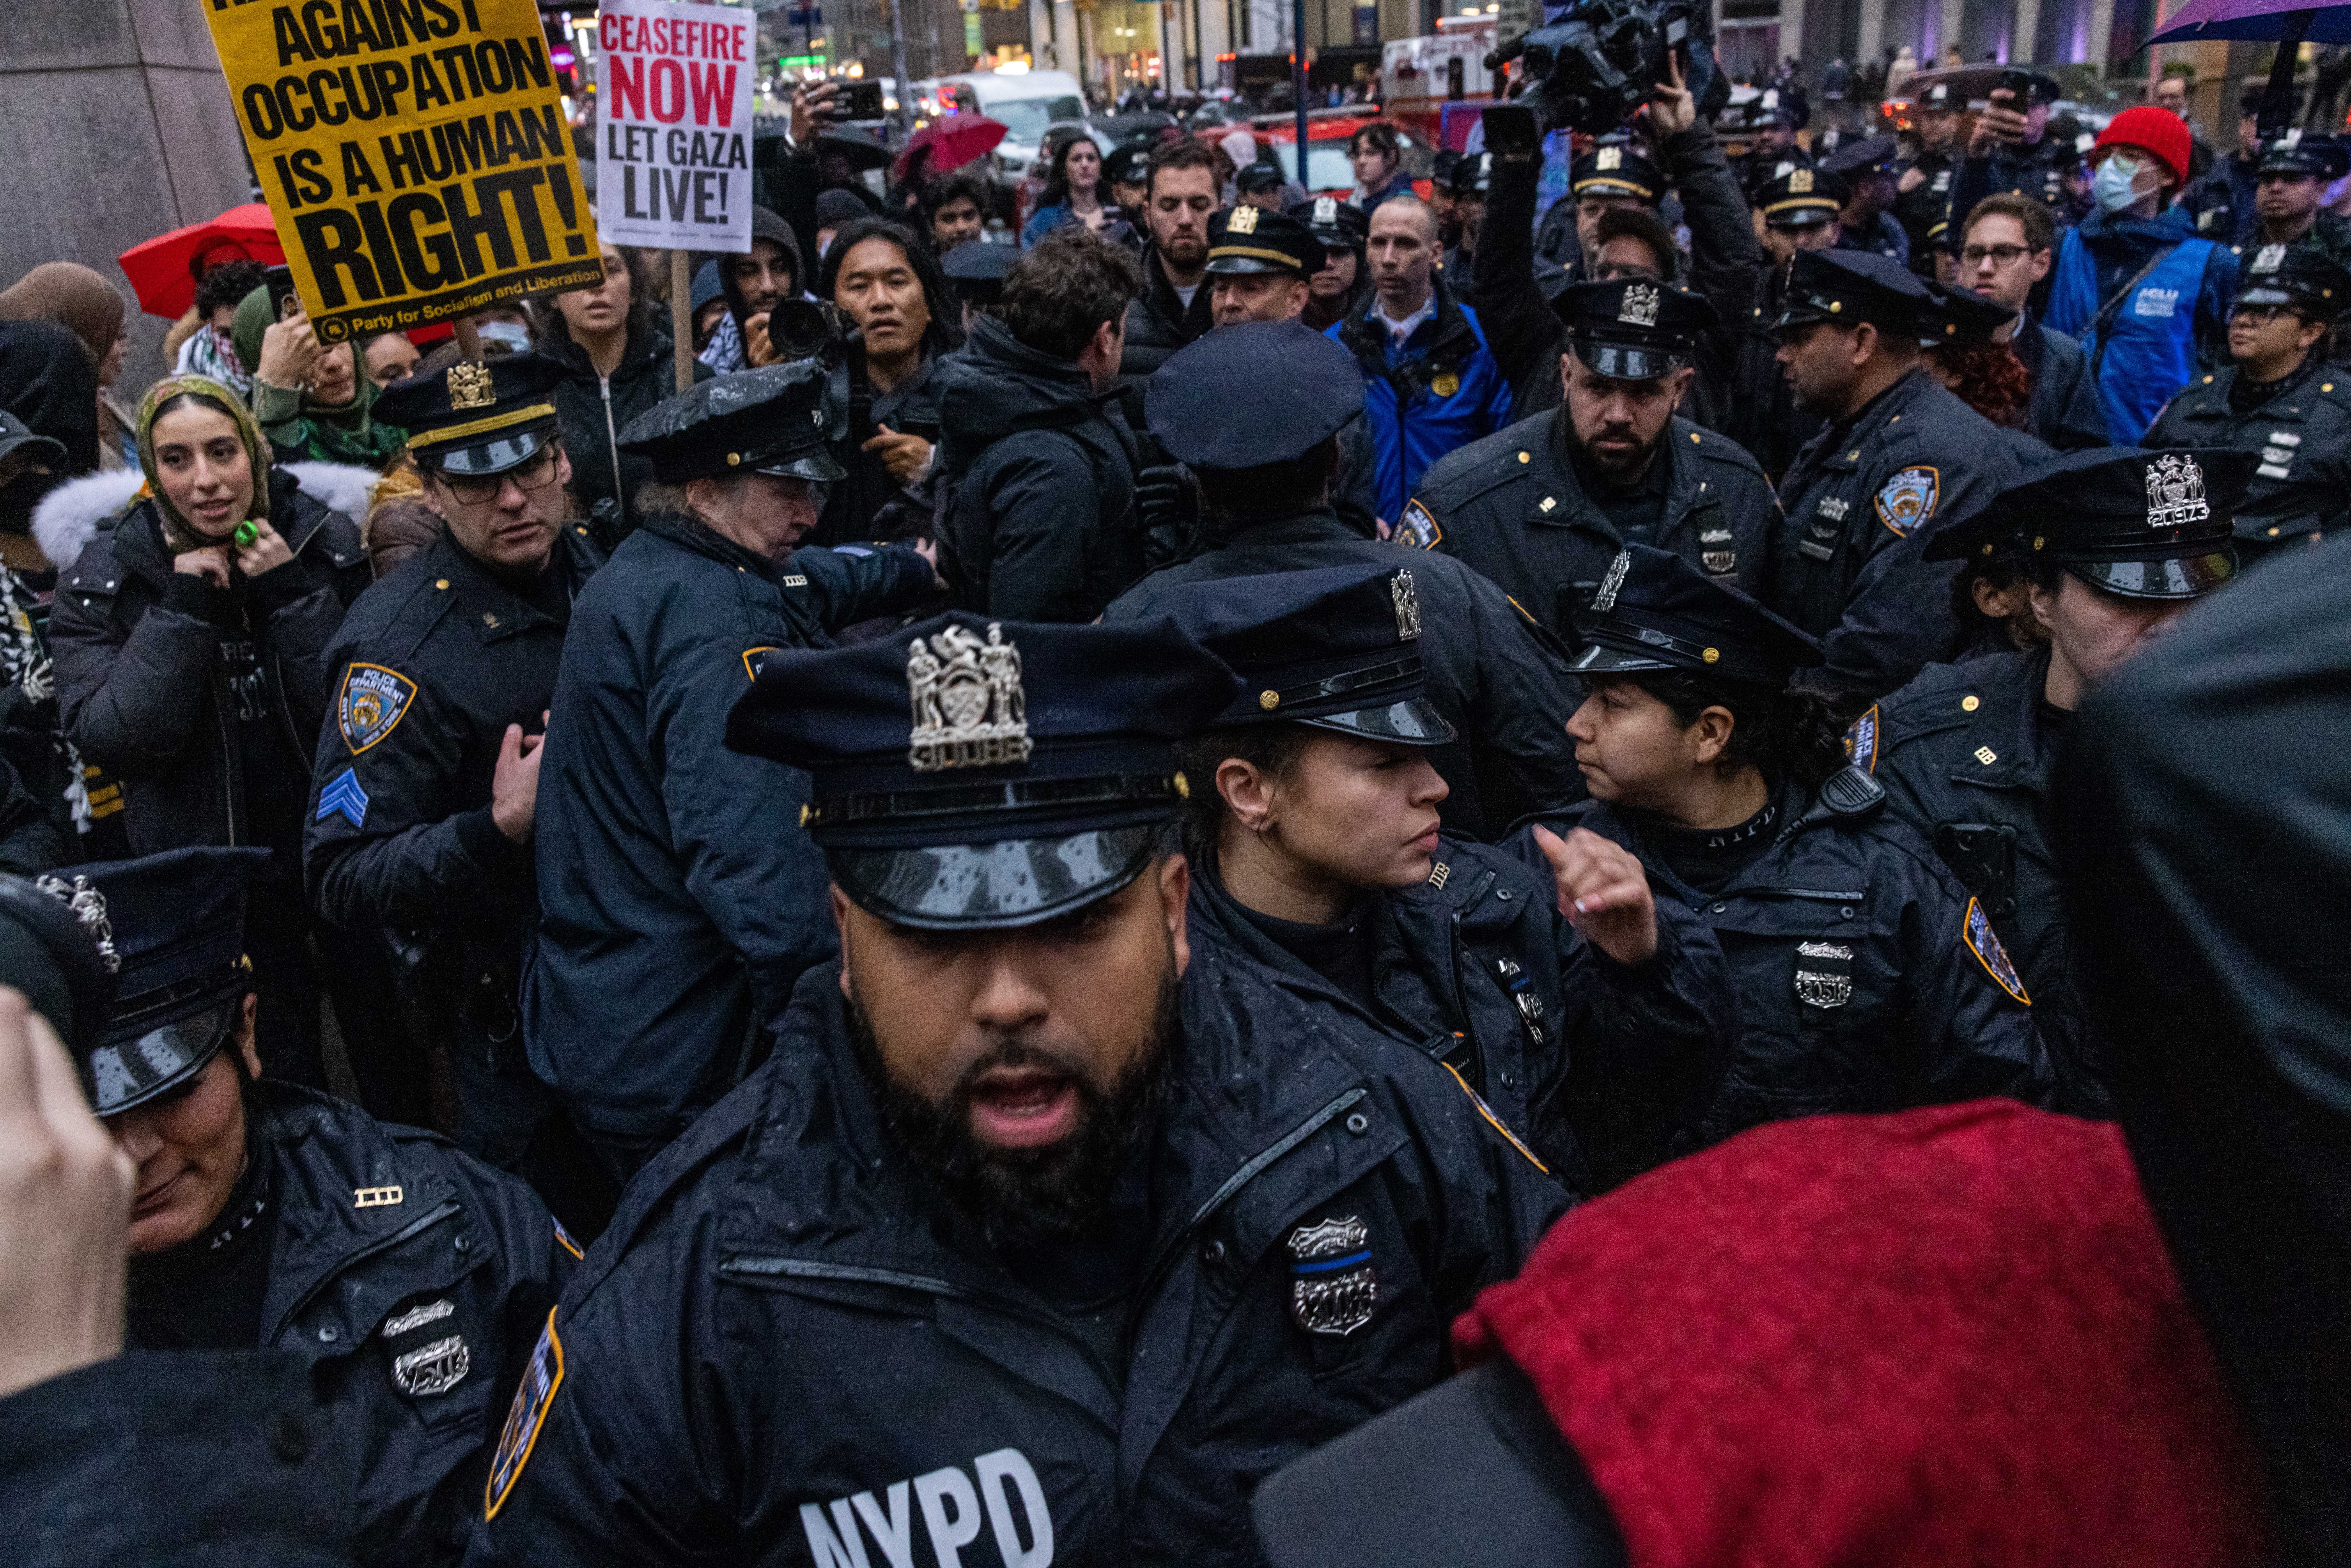 NYPD officers confront Pro-Palestinian demonstrators a few blocks from Radio City Music Hall